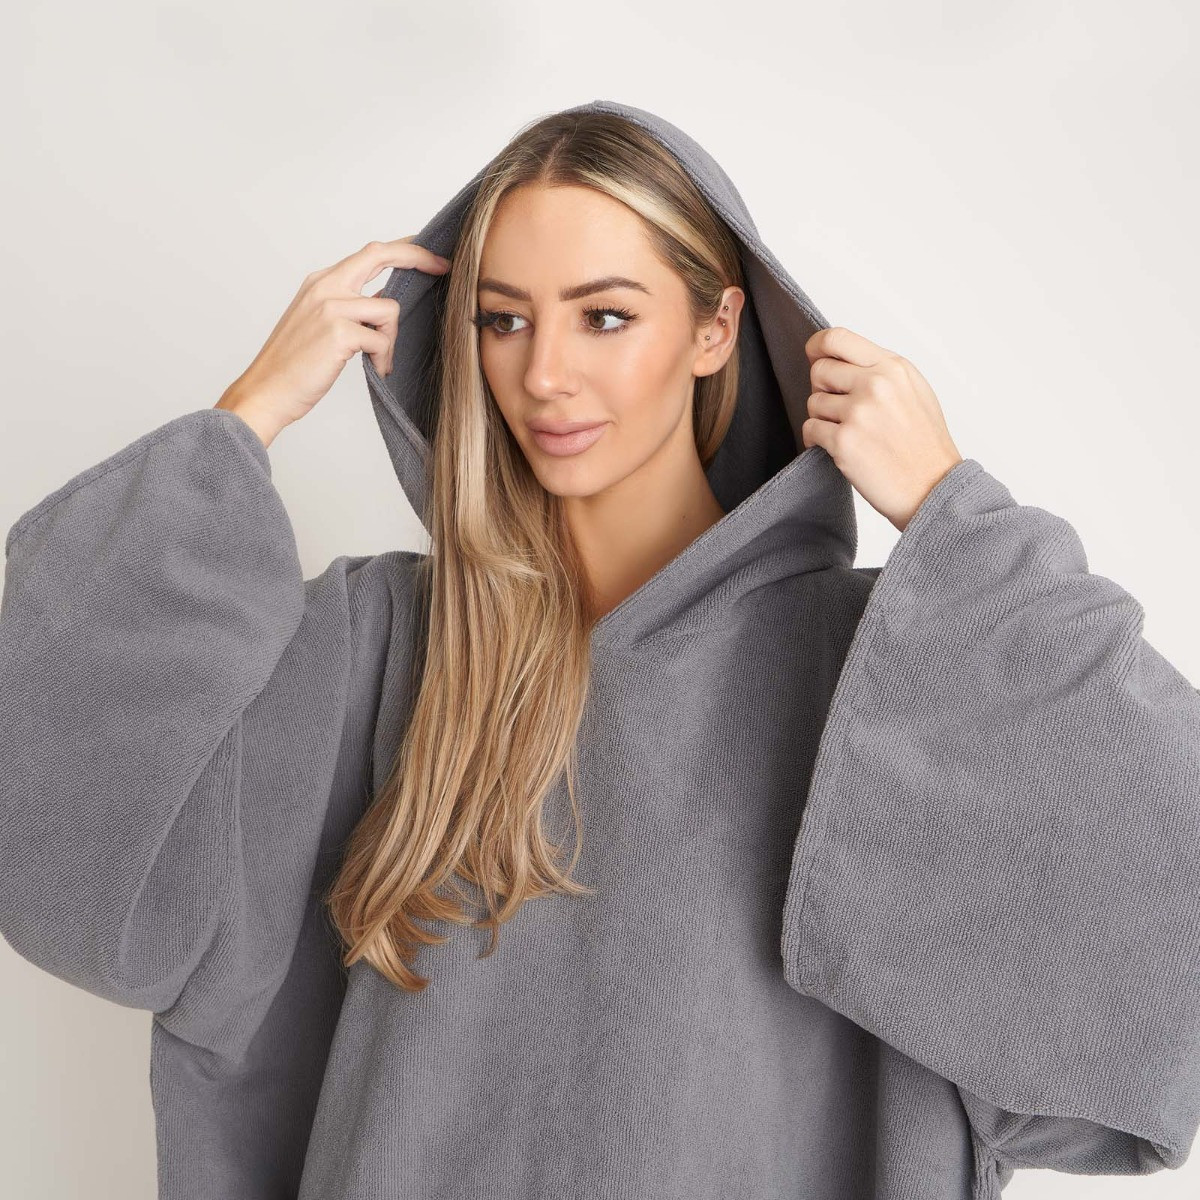 OHS Adult Towel Poncho - Charcoal Grey>